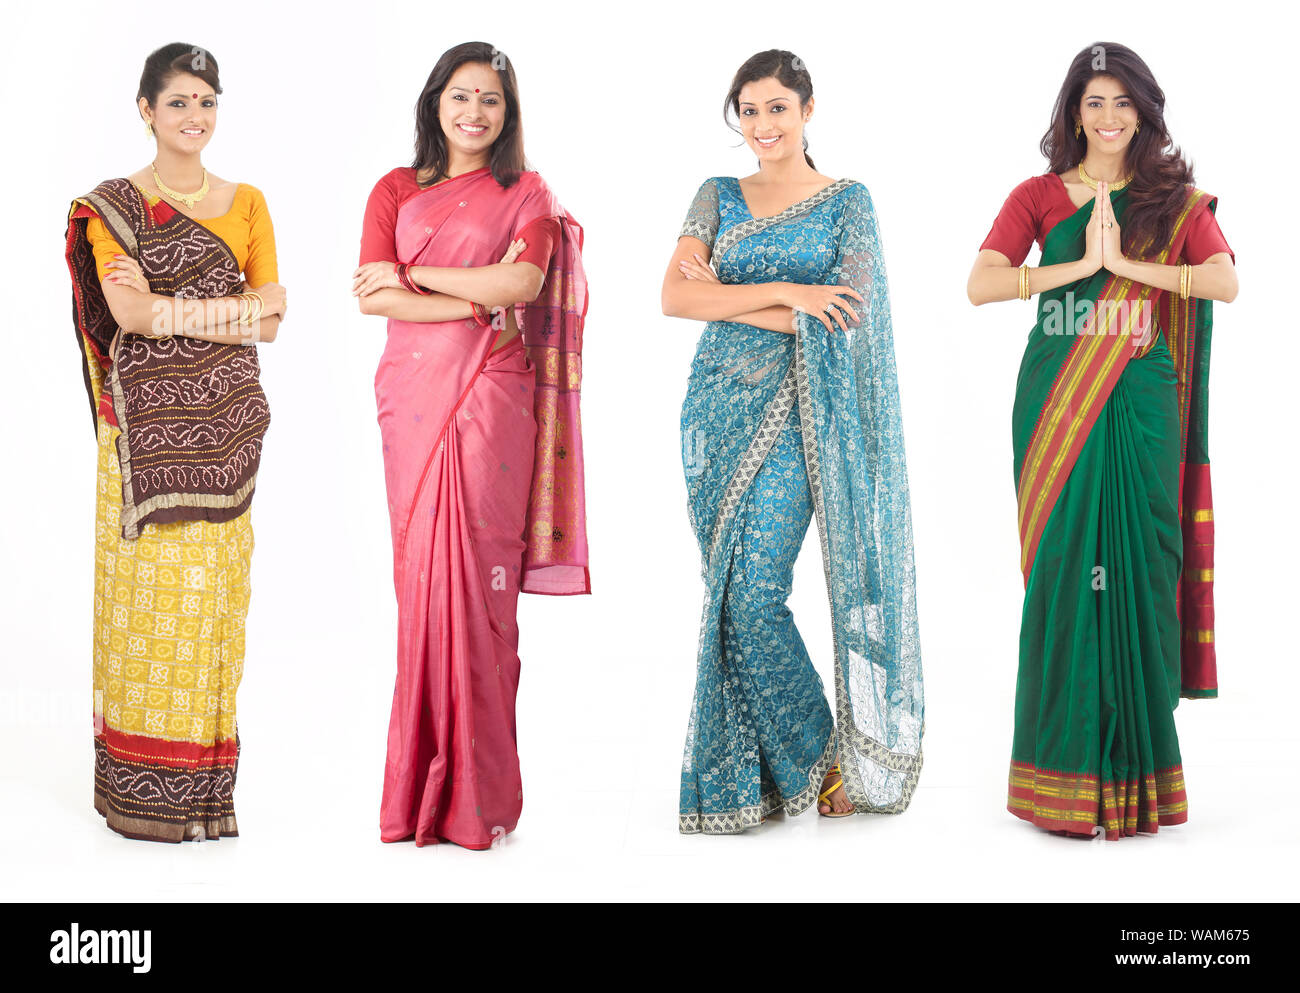 Four young woman standing together in sari Stock Photo